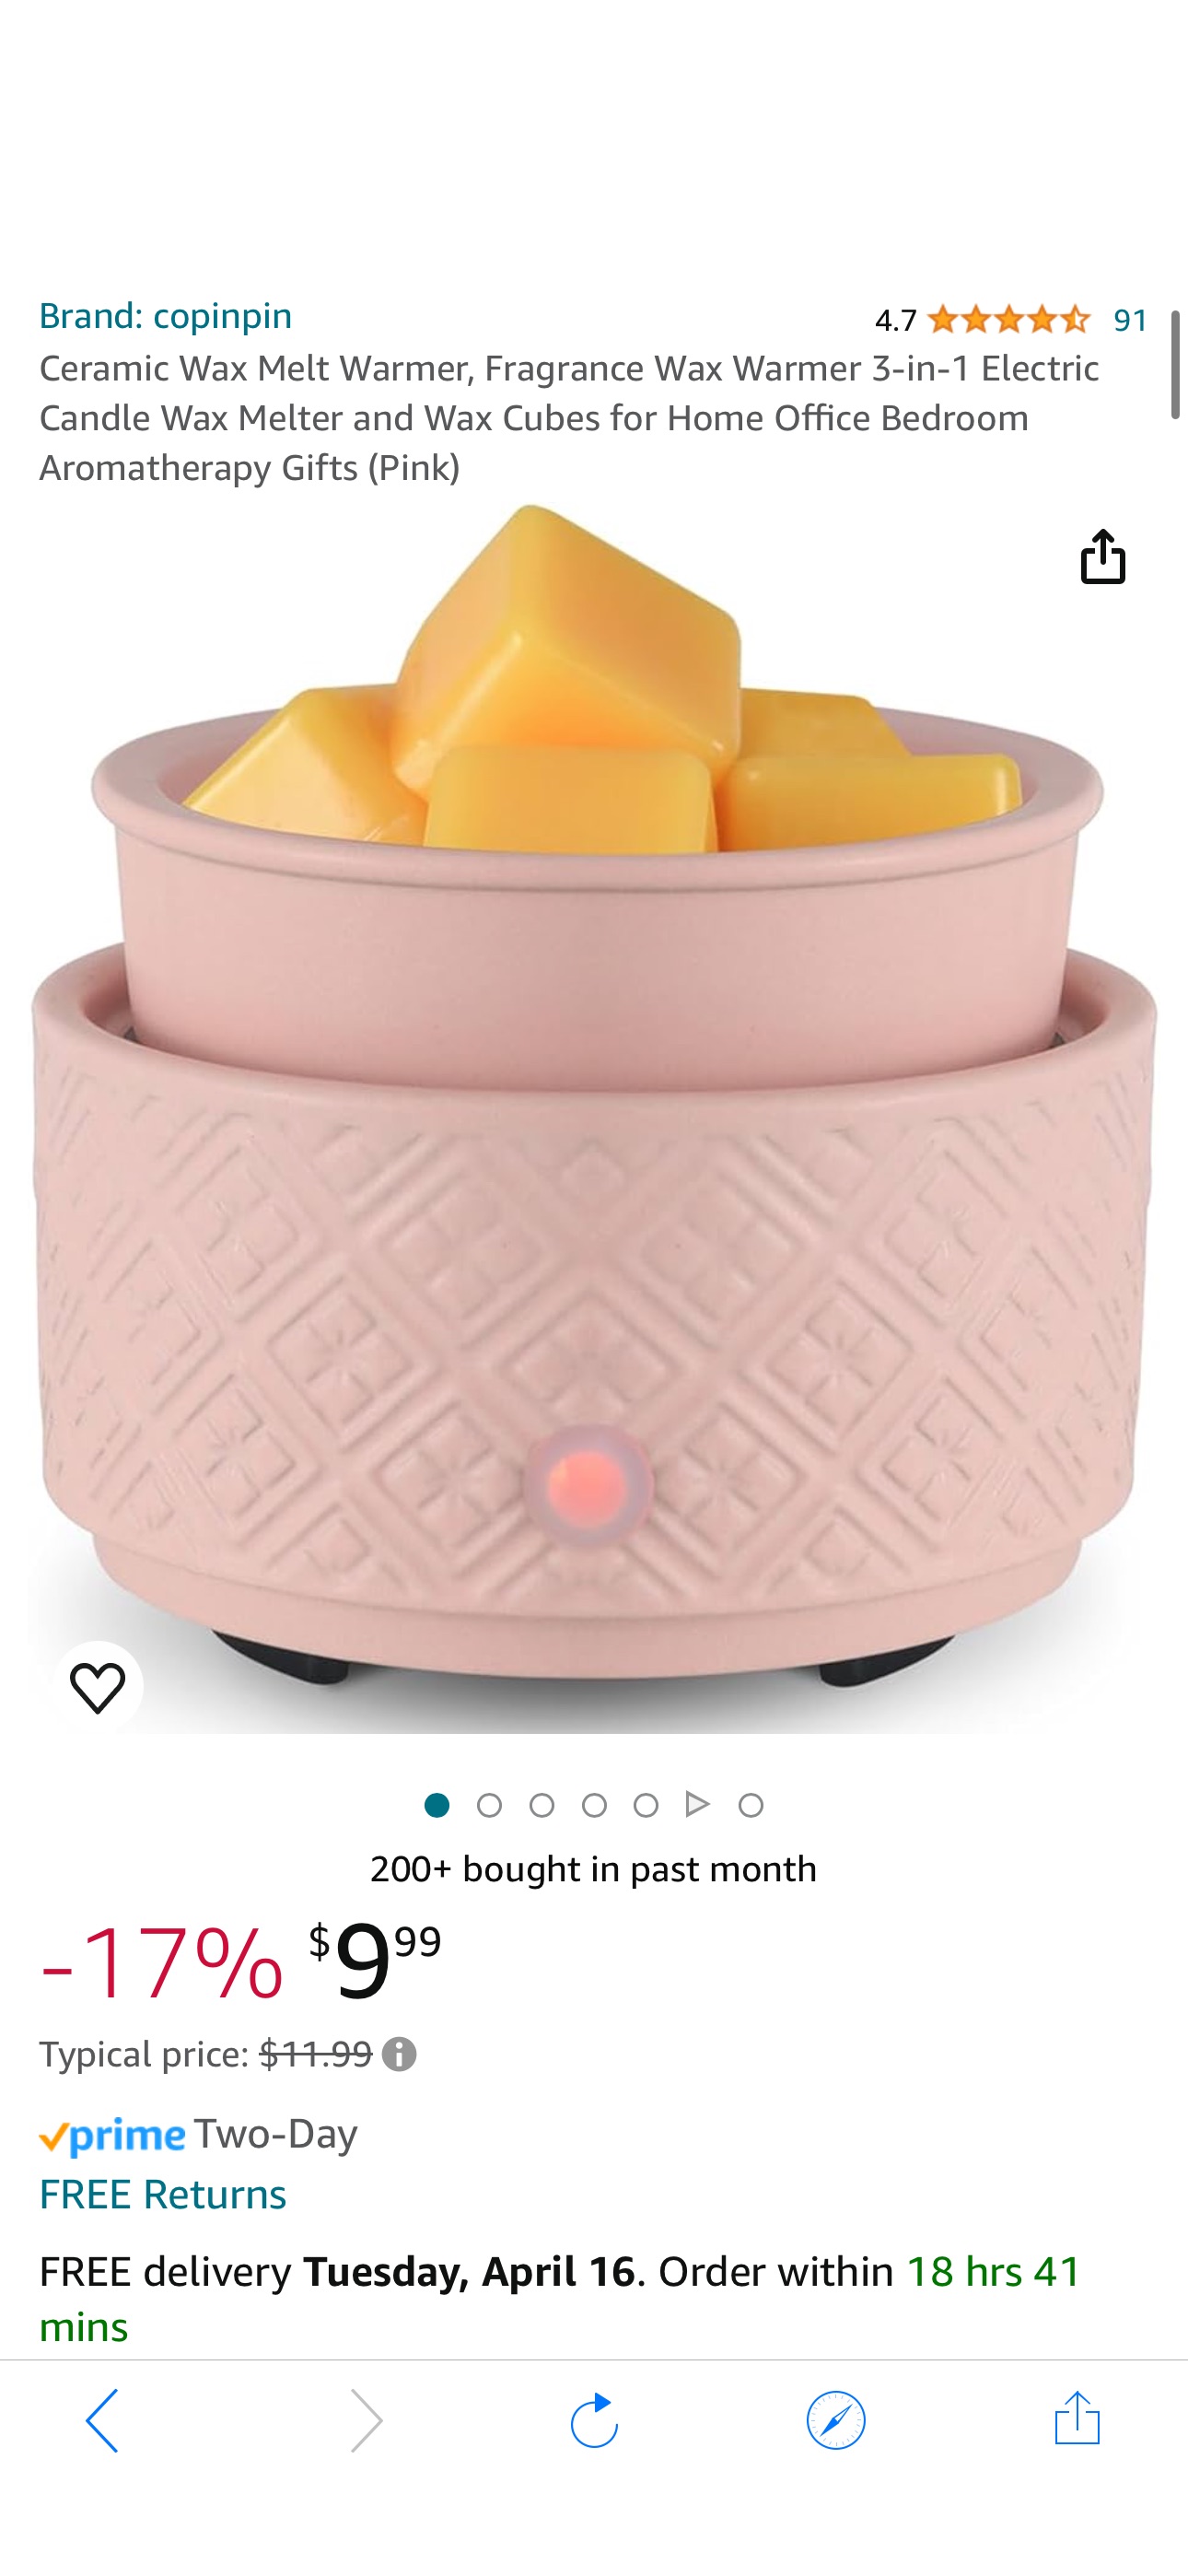 Amazon.com: copinpin Ceramic Wax Melt Warmer, Fragrance Wax Warmer 3-in-1 Electric Candle Wax Melter and Wax Cubes for Home Office Bedroom Aromatherapy Gifts (Pink) : Home & Kitchen